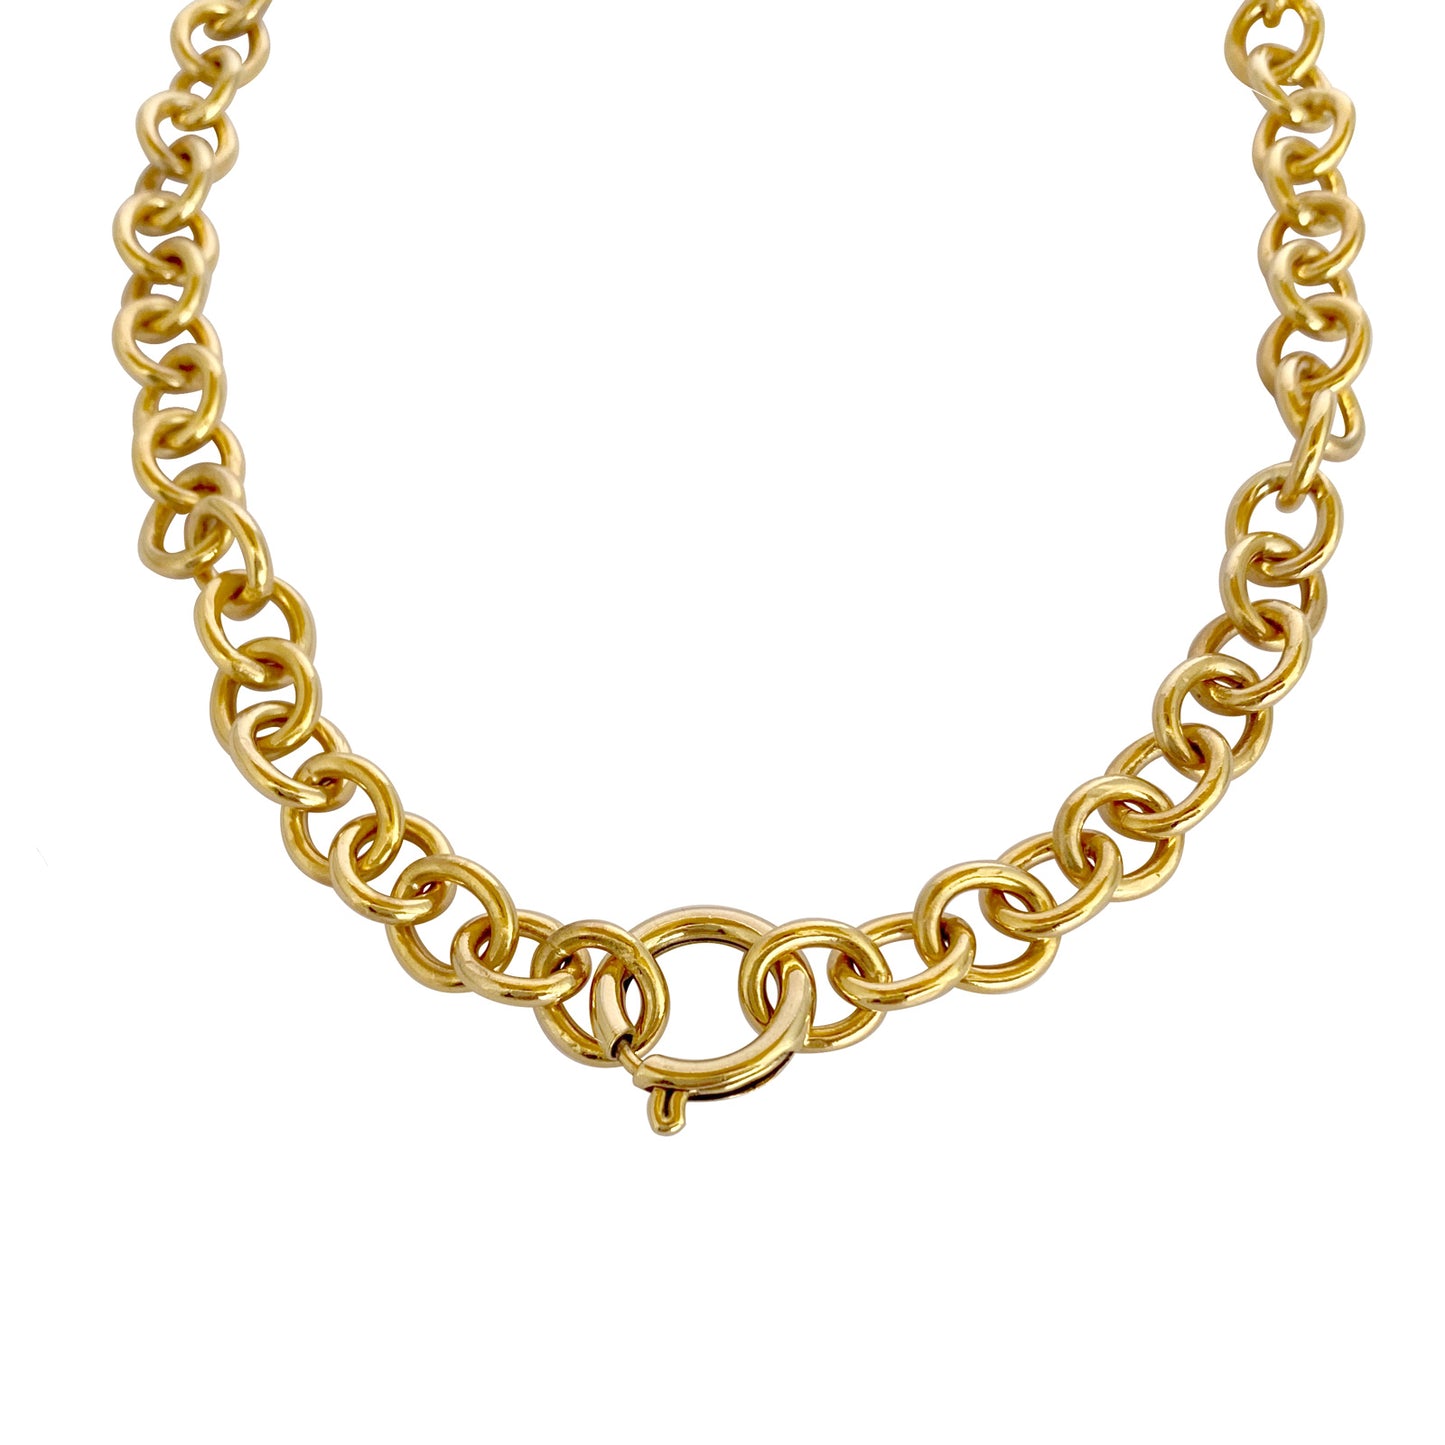 bold-chain-gold-with-open-clip-for-charms-colombian-designers